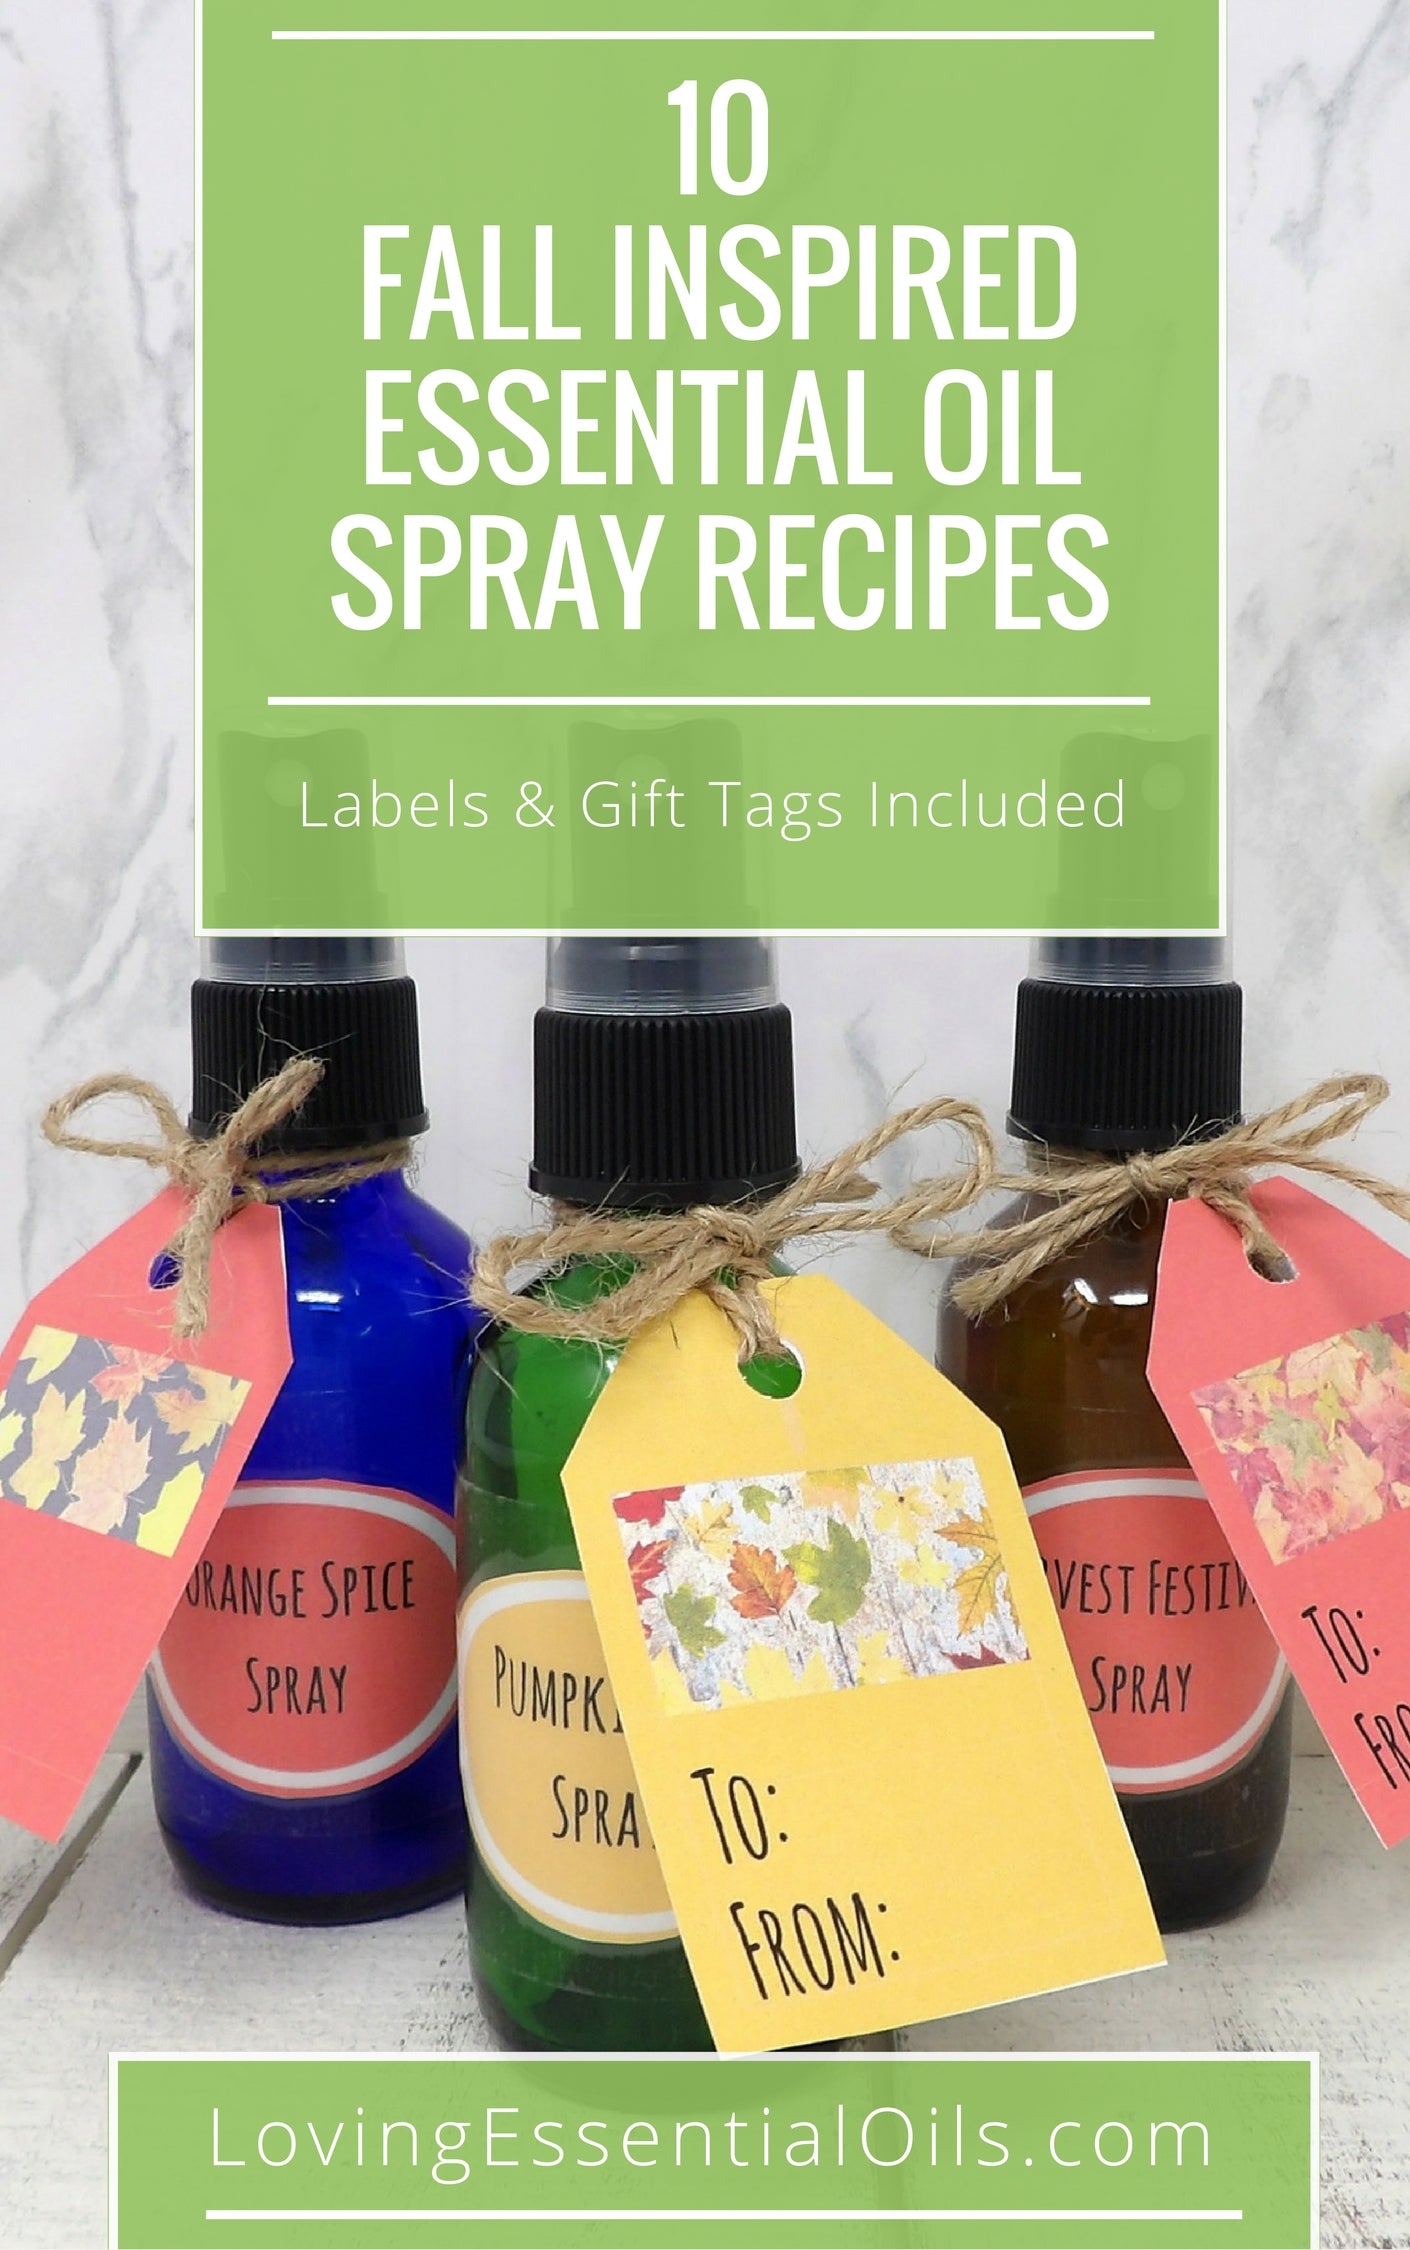 Fall Inspired Essential Oil Room Spray Recipes Guide by Loving Essential Oils